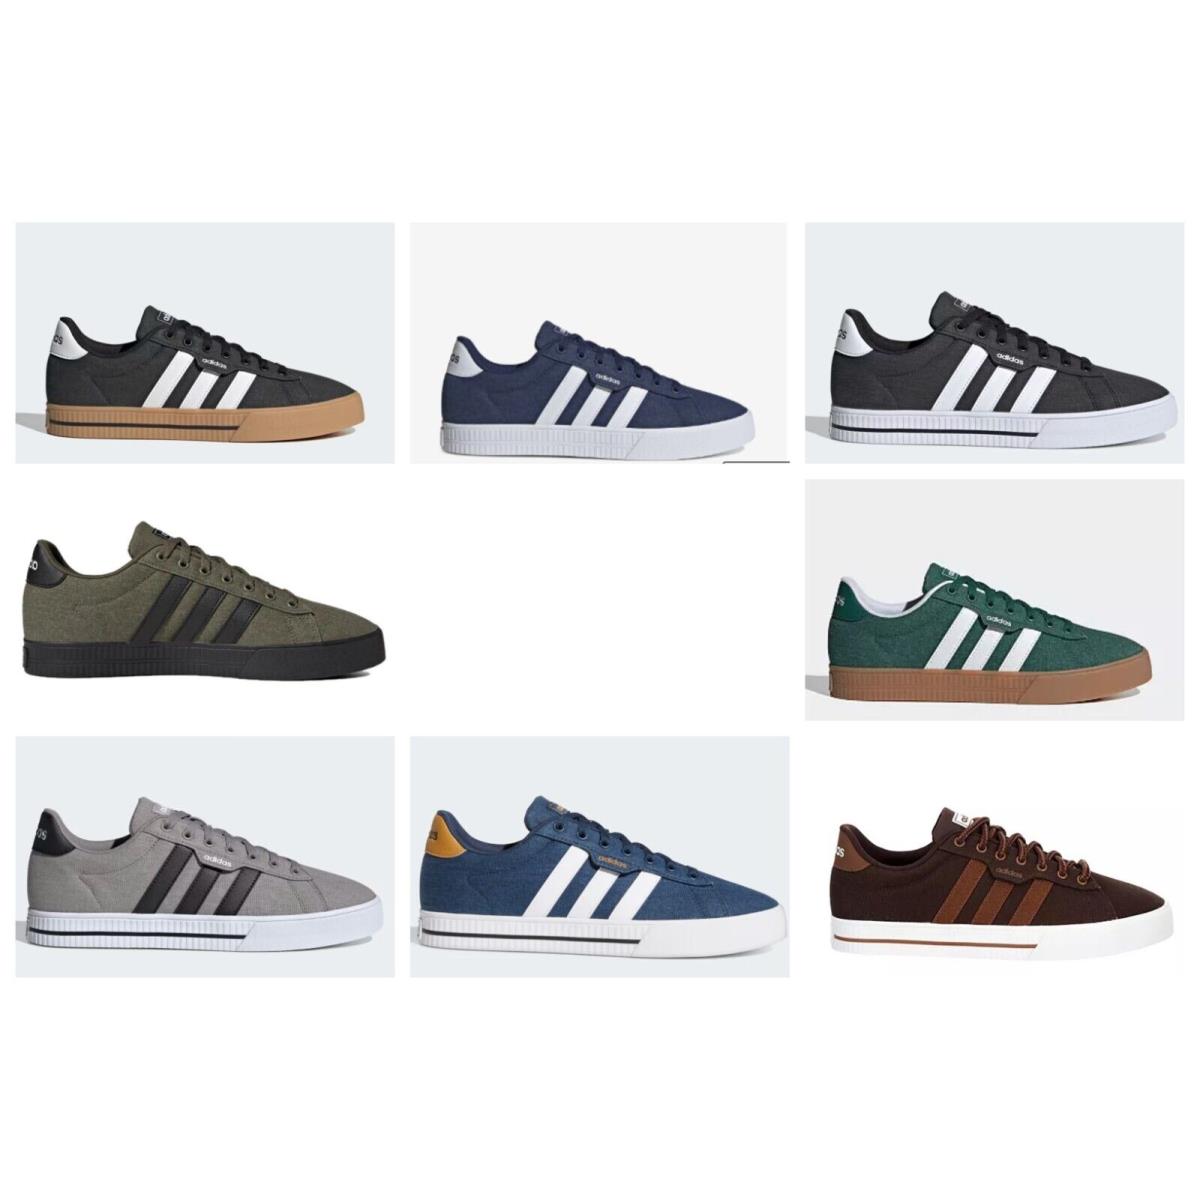 Adidas Daily 3.0 Mens Canvas Ortholite Low Top Casual Fashion Sneakers Shoe